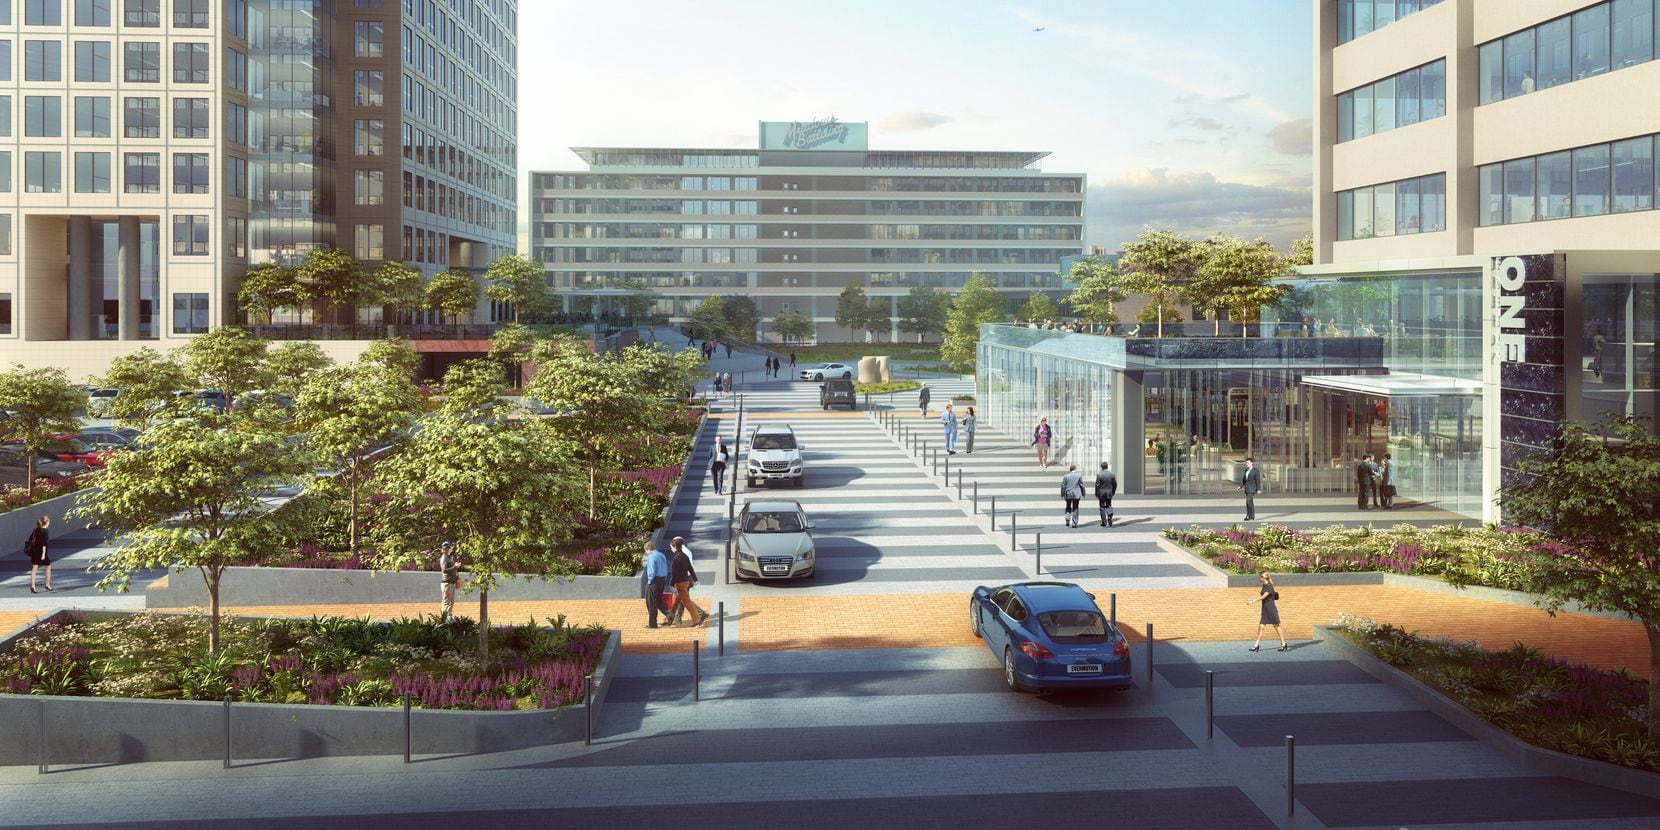 A central boulevard will provide access to all the buildings at Energy Square.